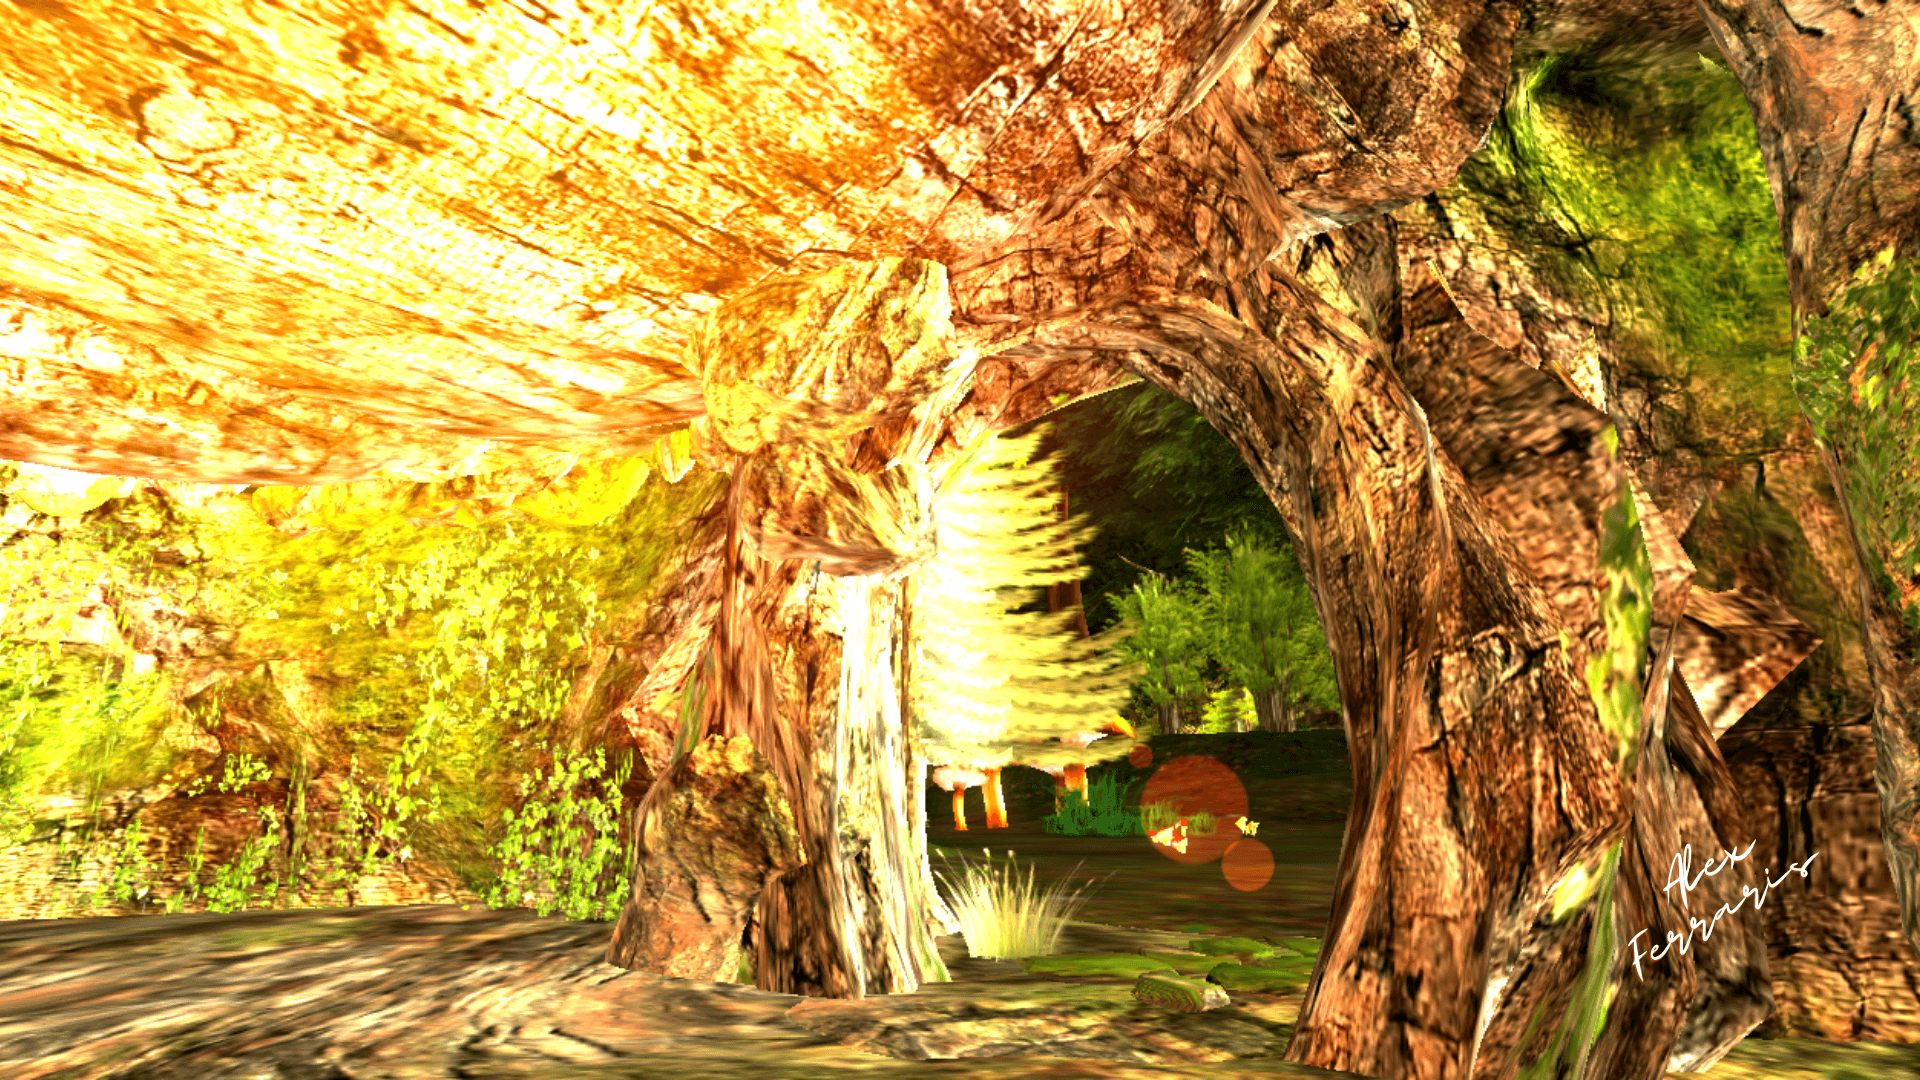 Cave from inside in a metaverse